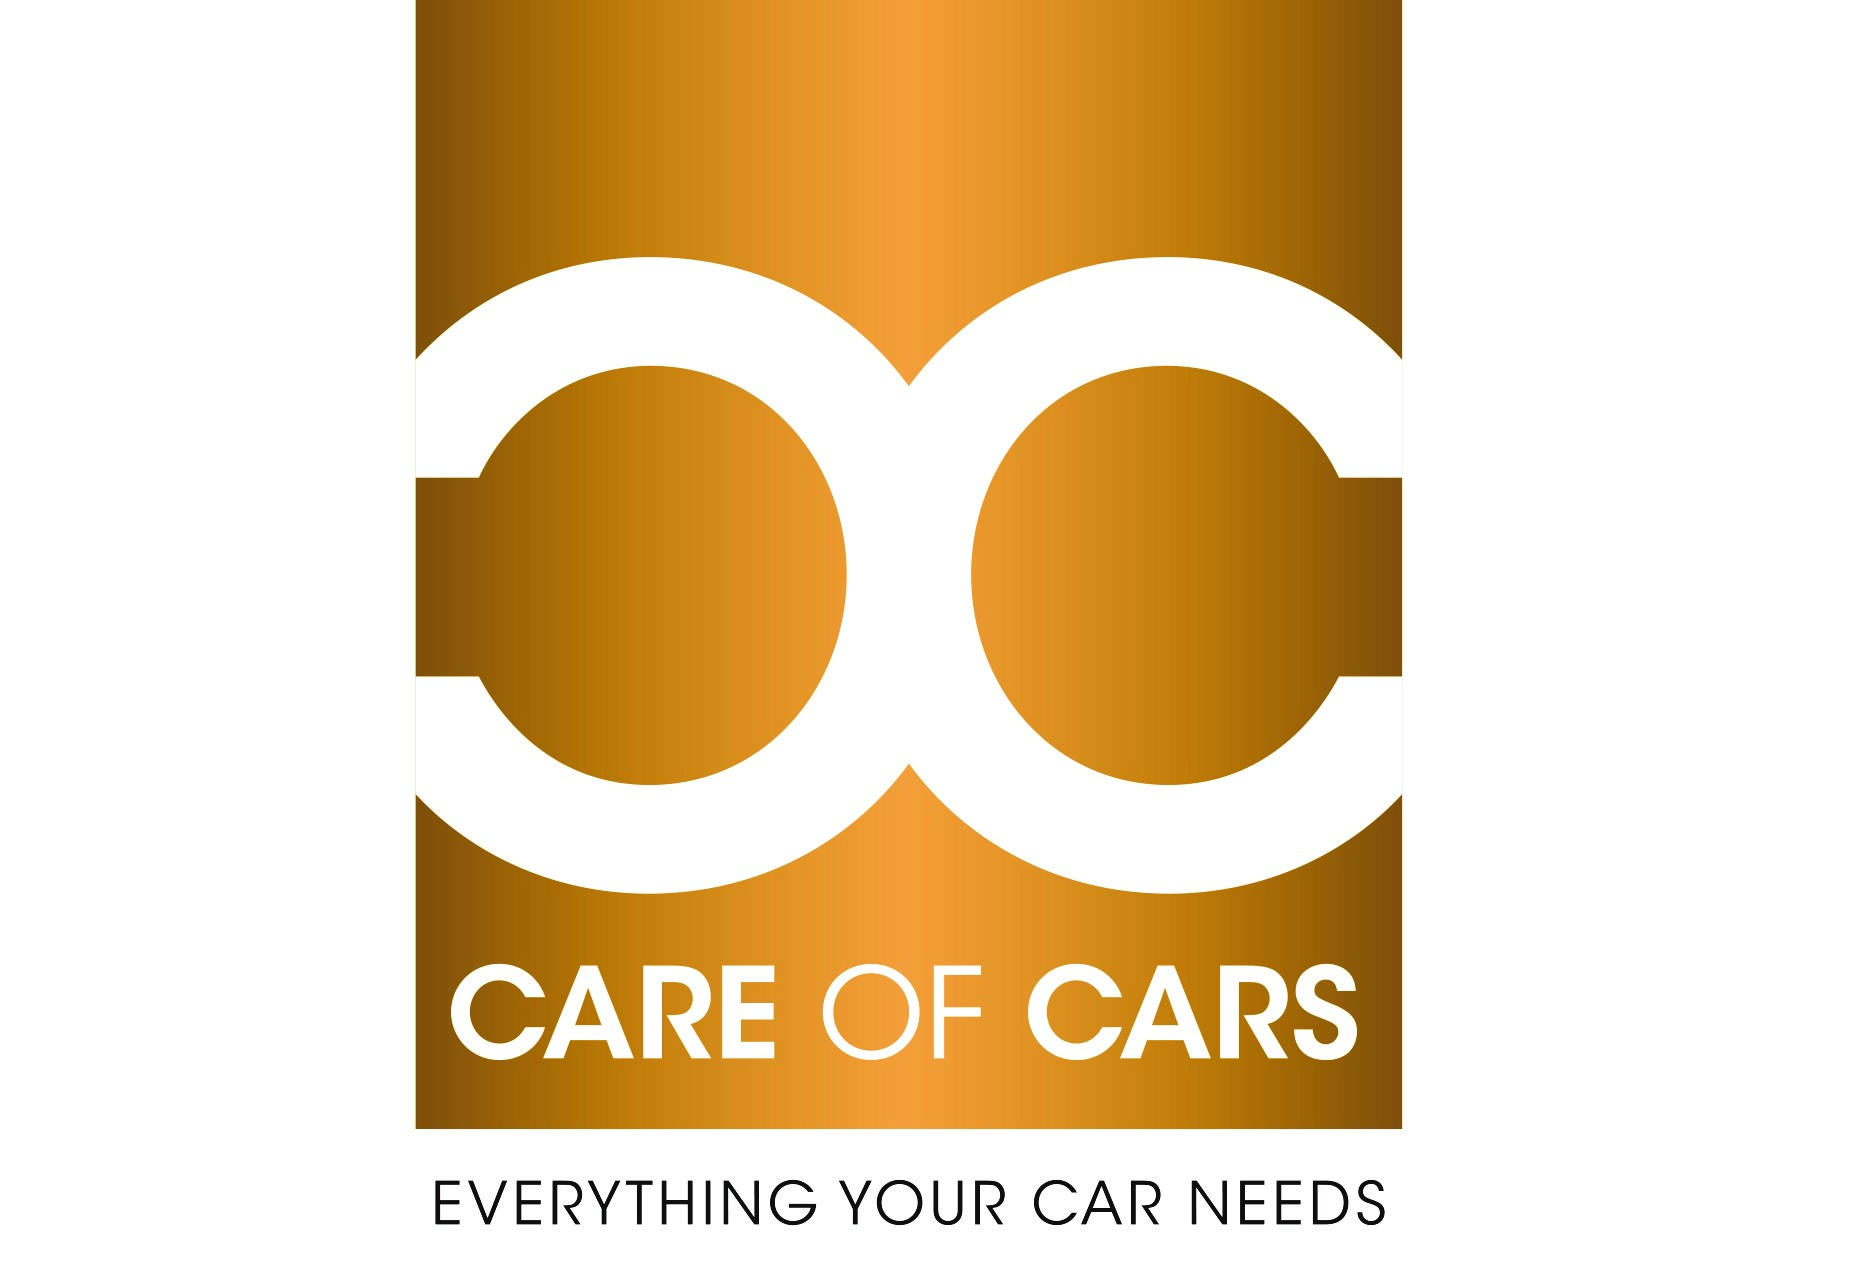 CC CARE OF CARS EVERYTHING YOUR CAR NEEDS